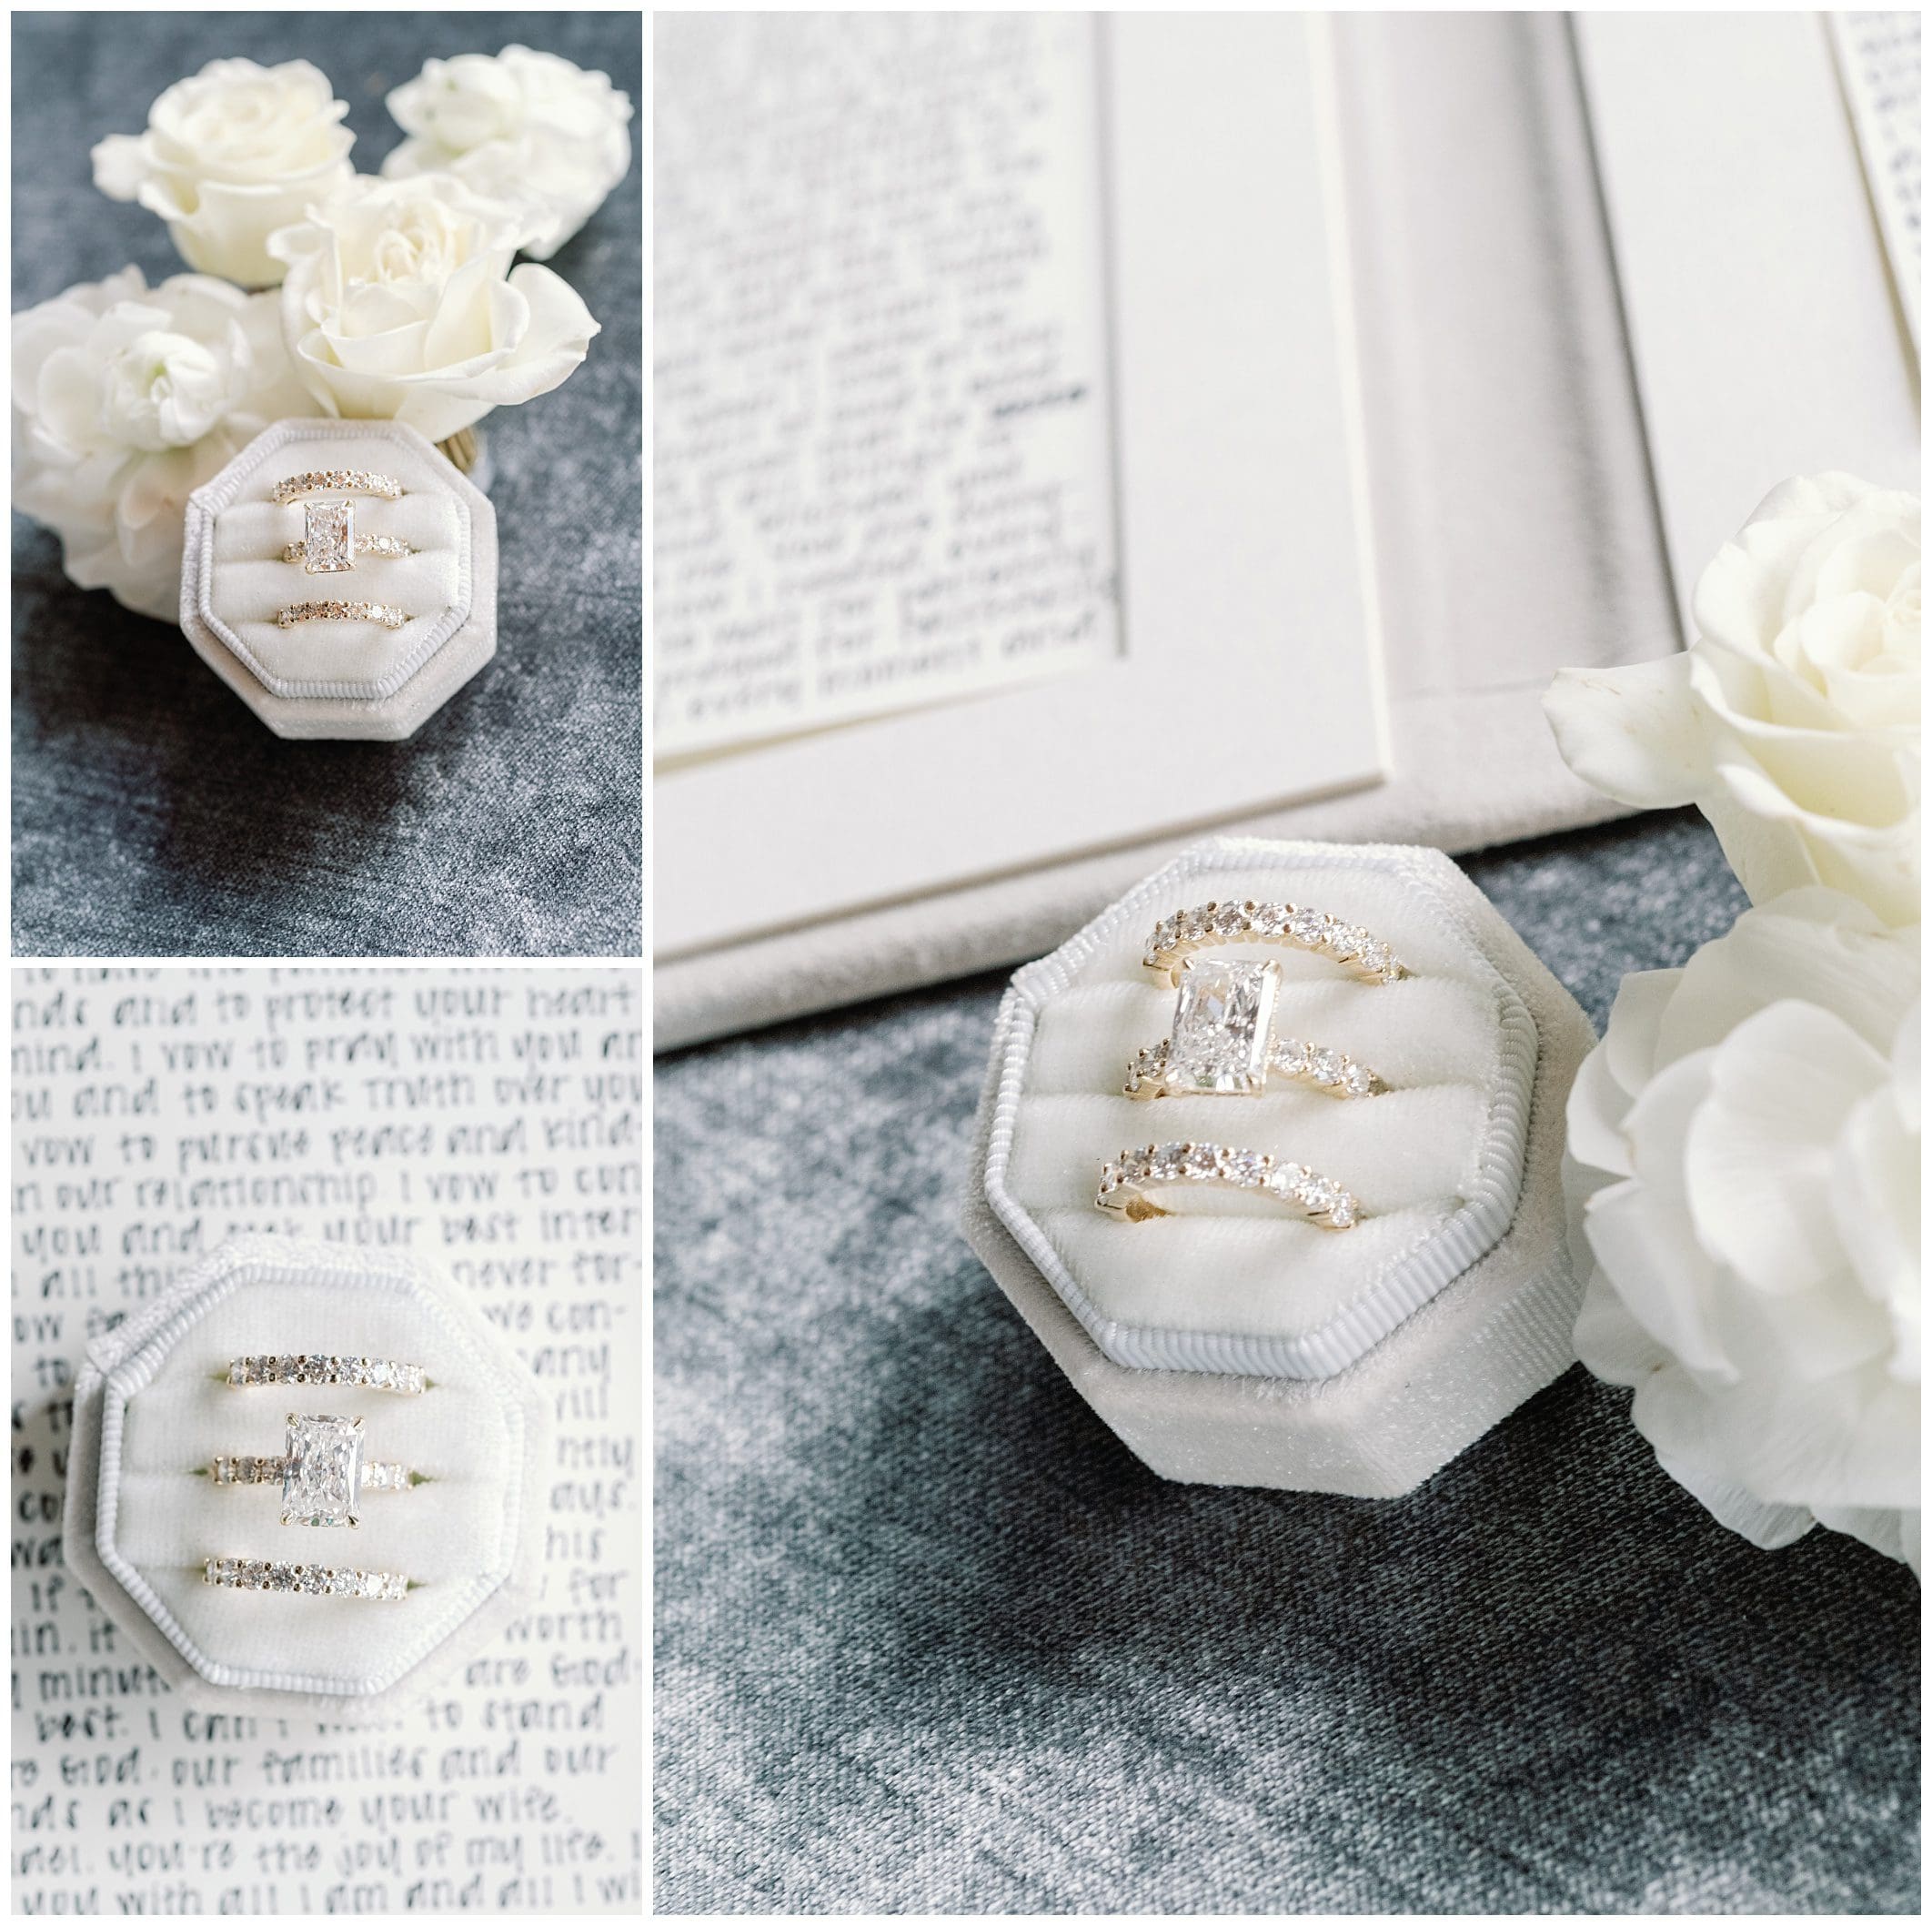 Flat lay image of an open vow book, elegant white flowers, and a velvet jewelry case holding diamond rings on a textured gray surface.